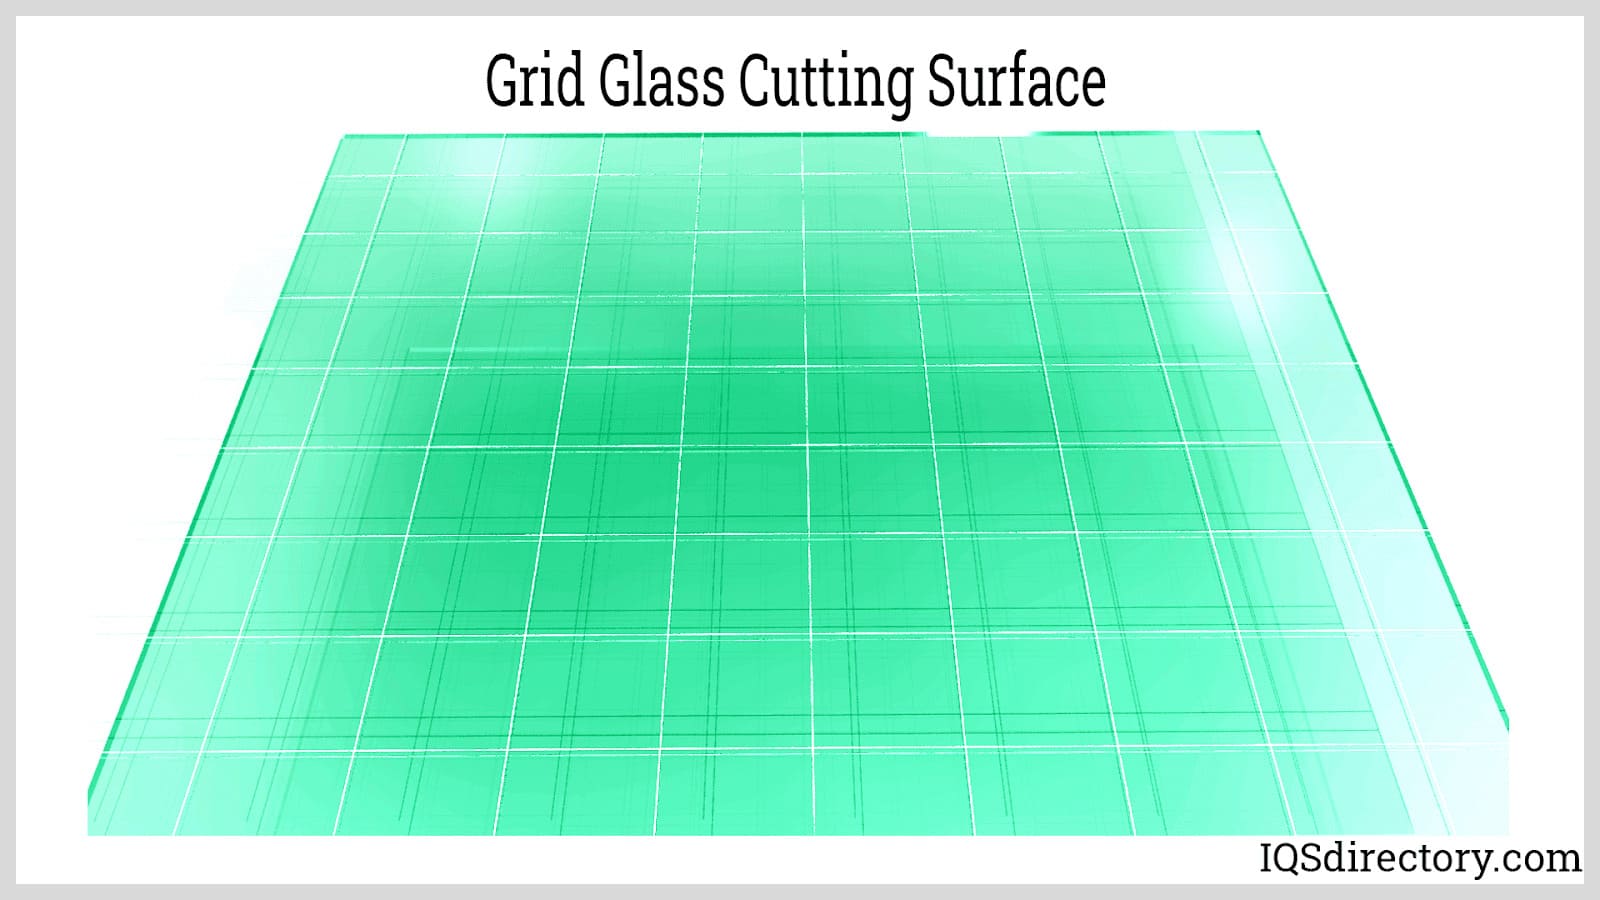 Grid Glass Cutting Surface